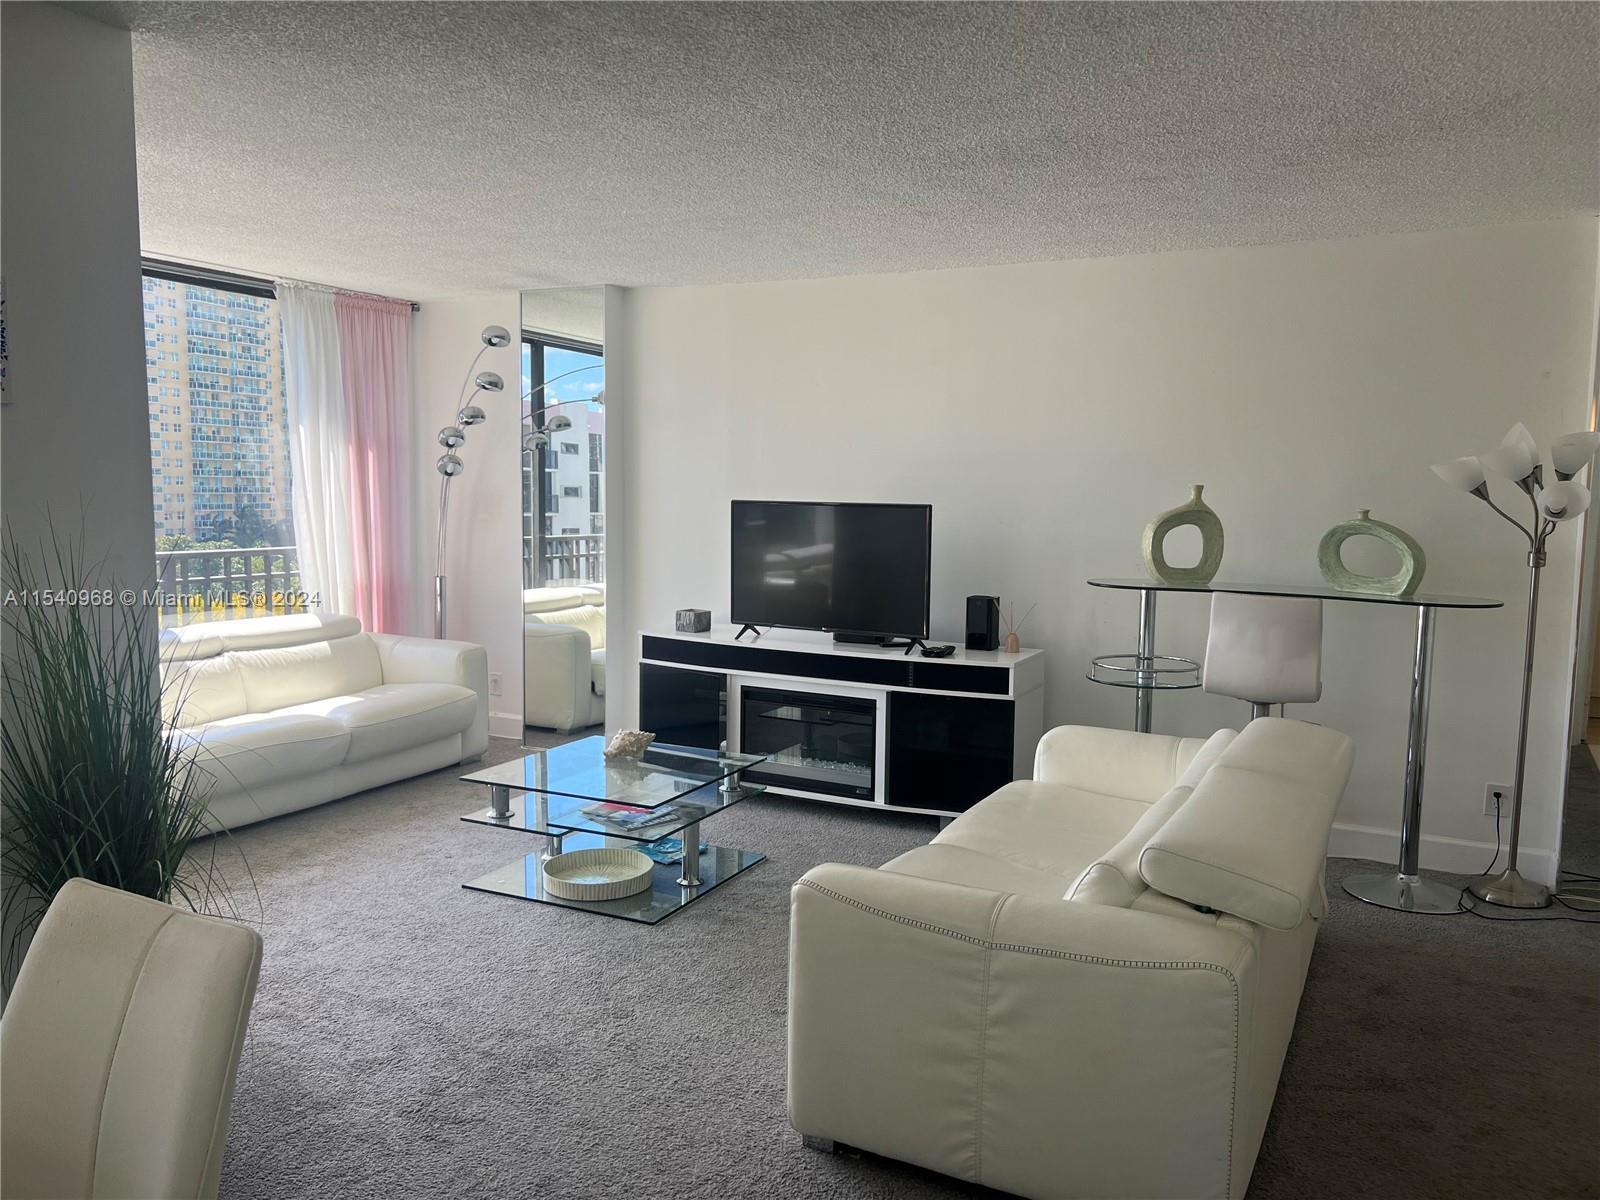 Cozy 1 bed 1 1/2 baths fully furnished for sale in the heart of Sunny Isles beach. Great garden view